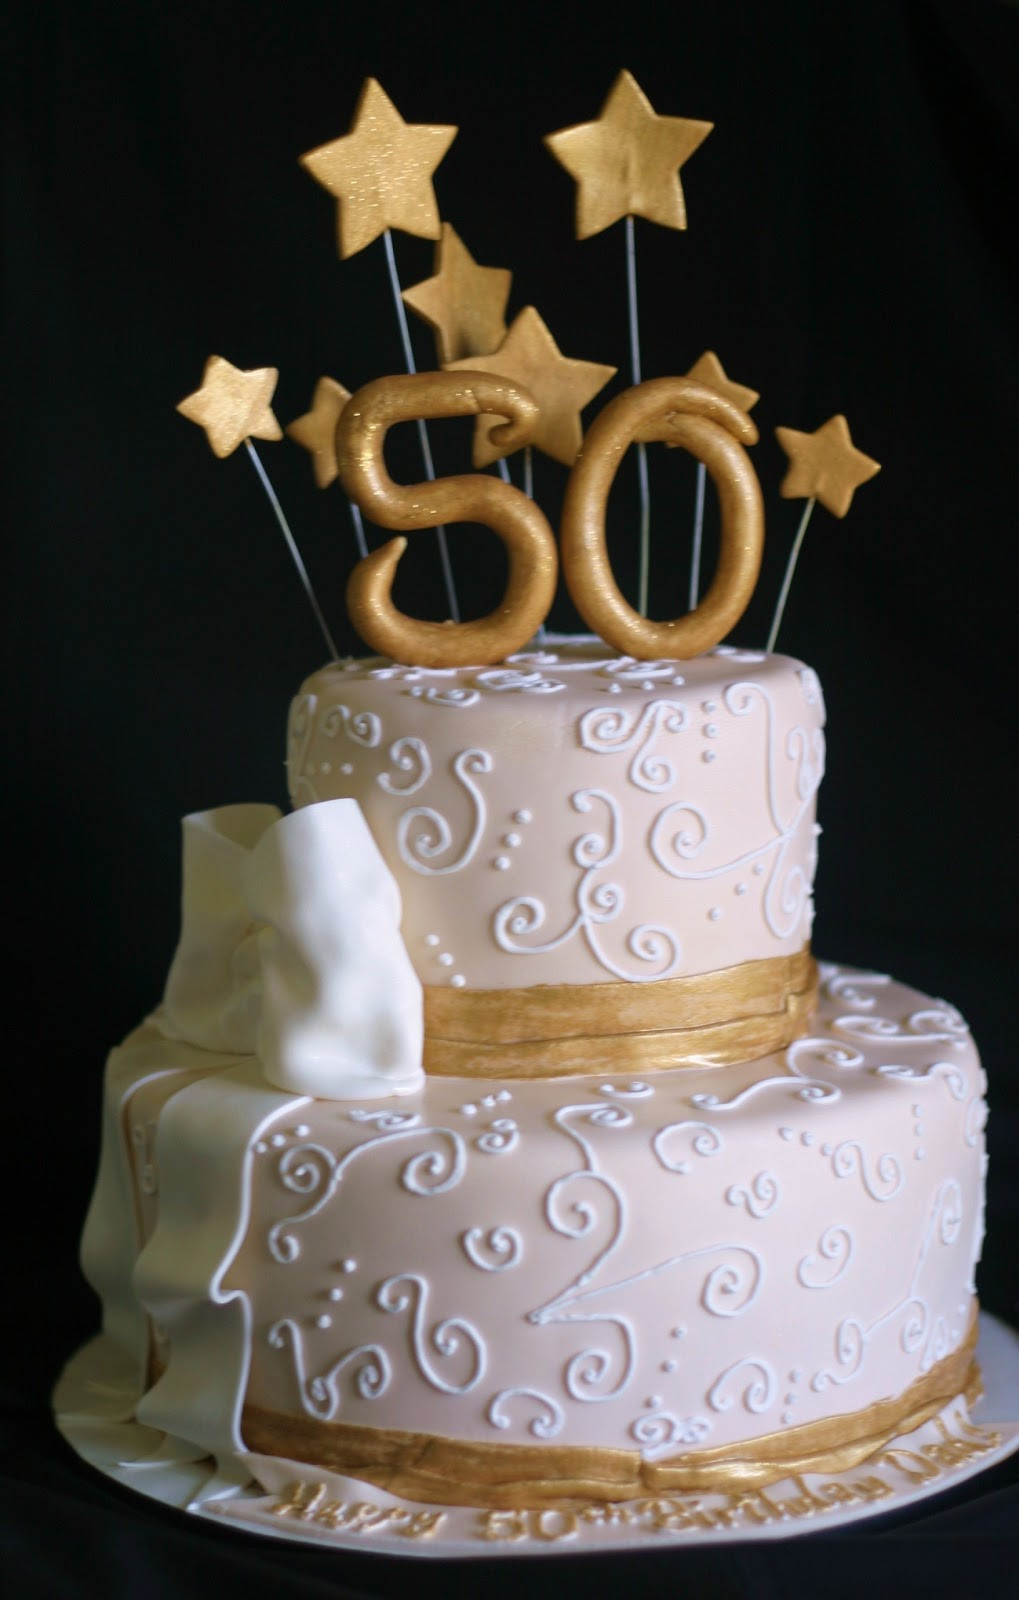 50th Birthday Cake Images
 Pink Little Cake Gold and light ivory 50th Birthday Cake